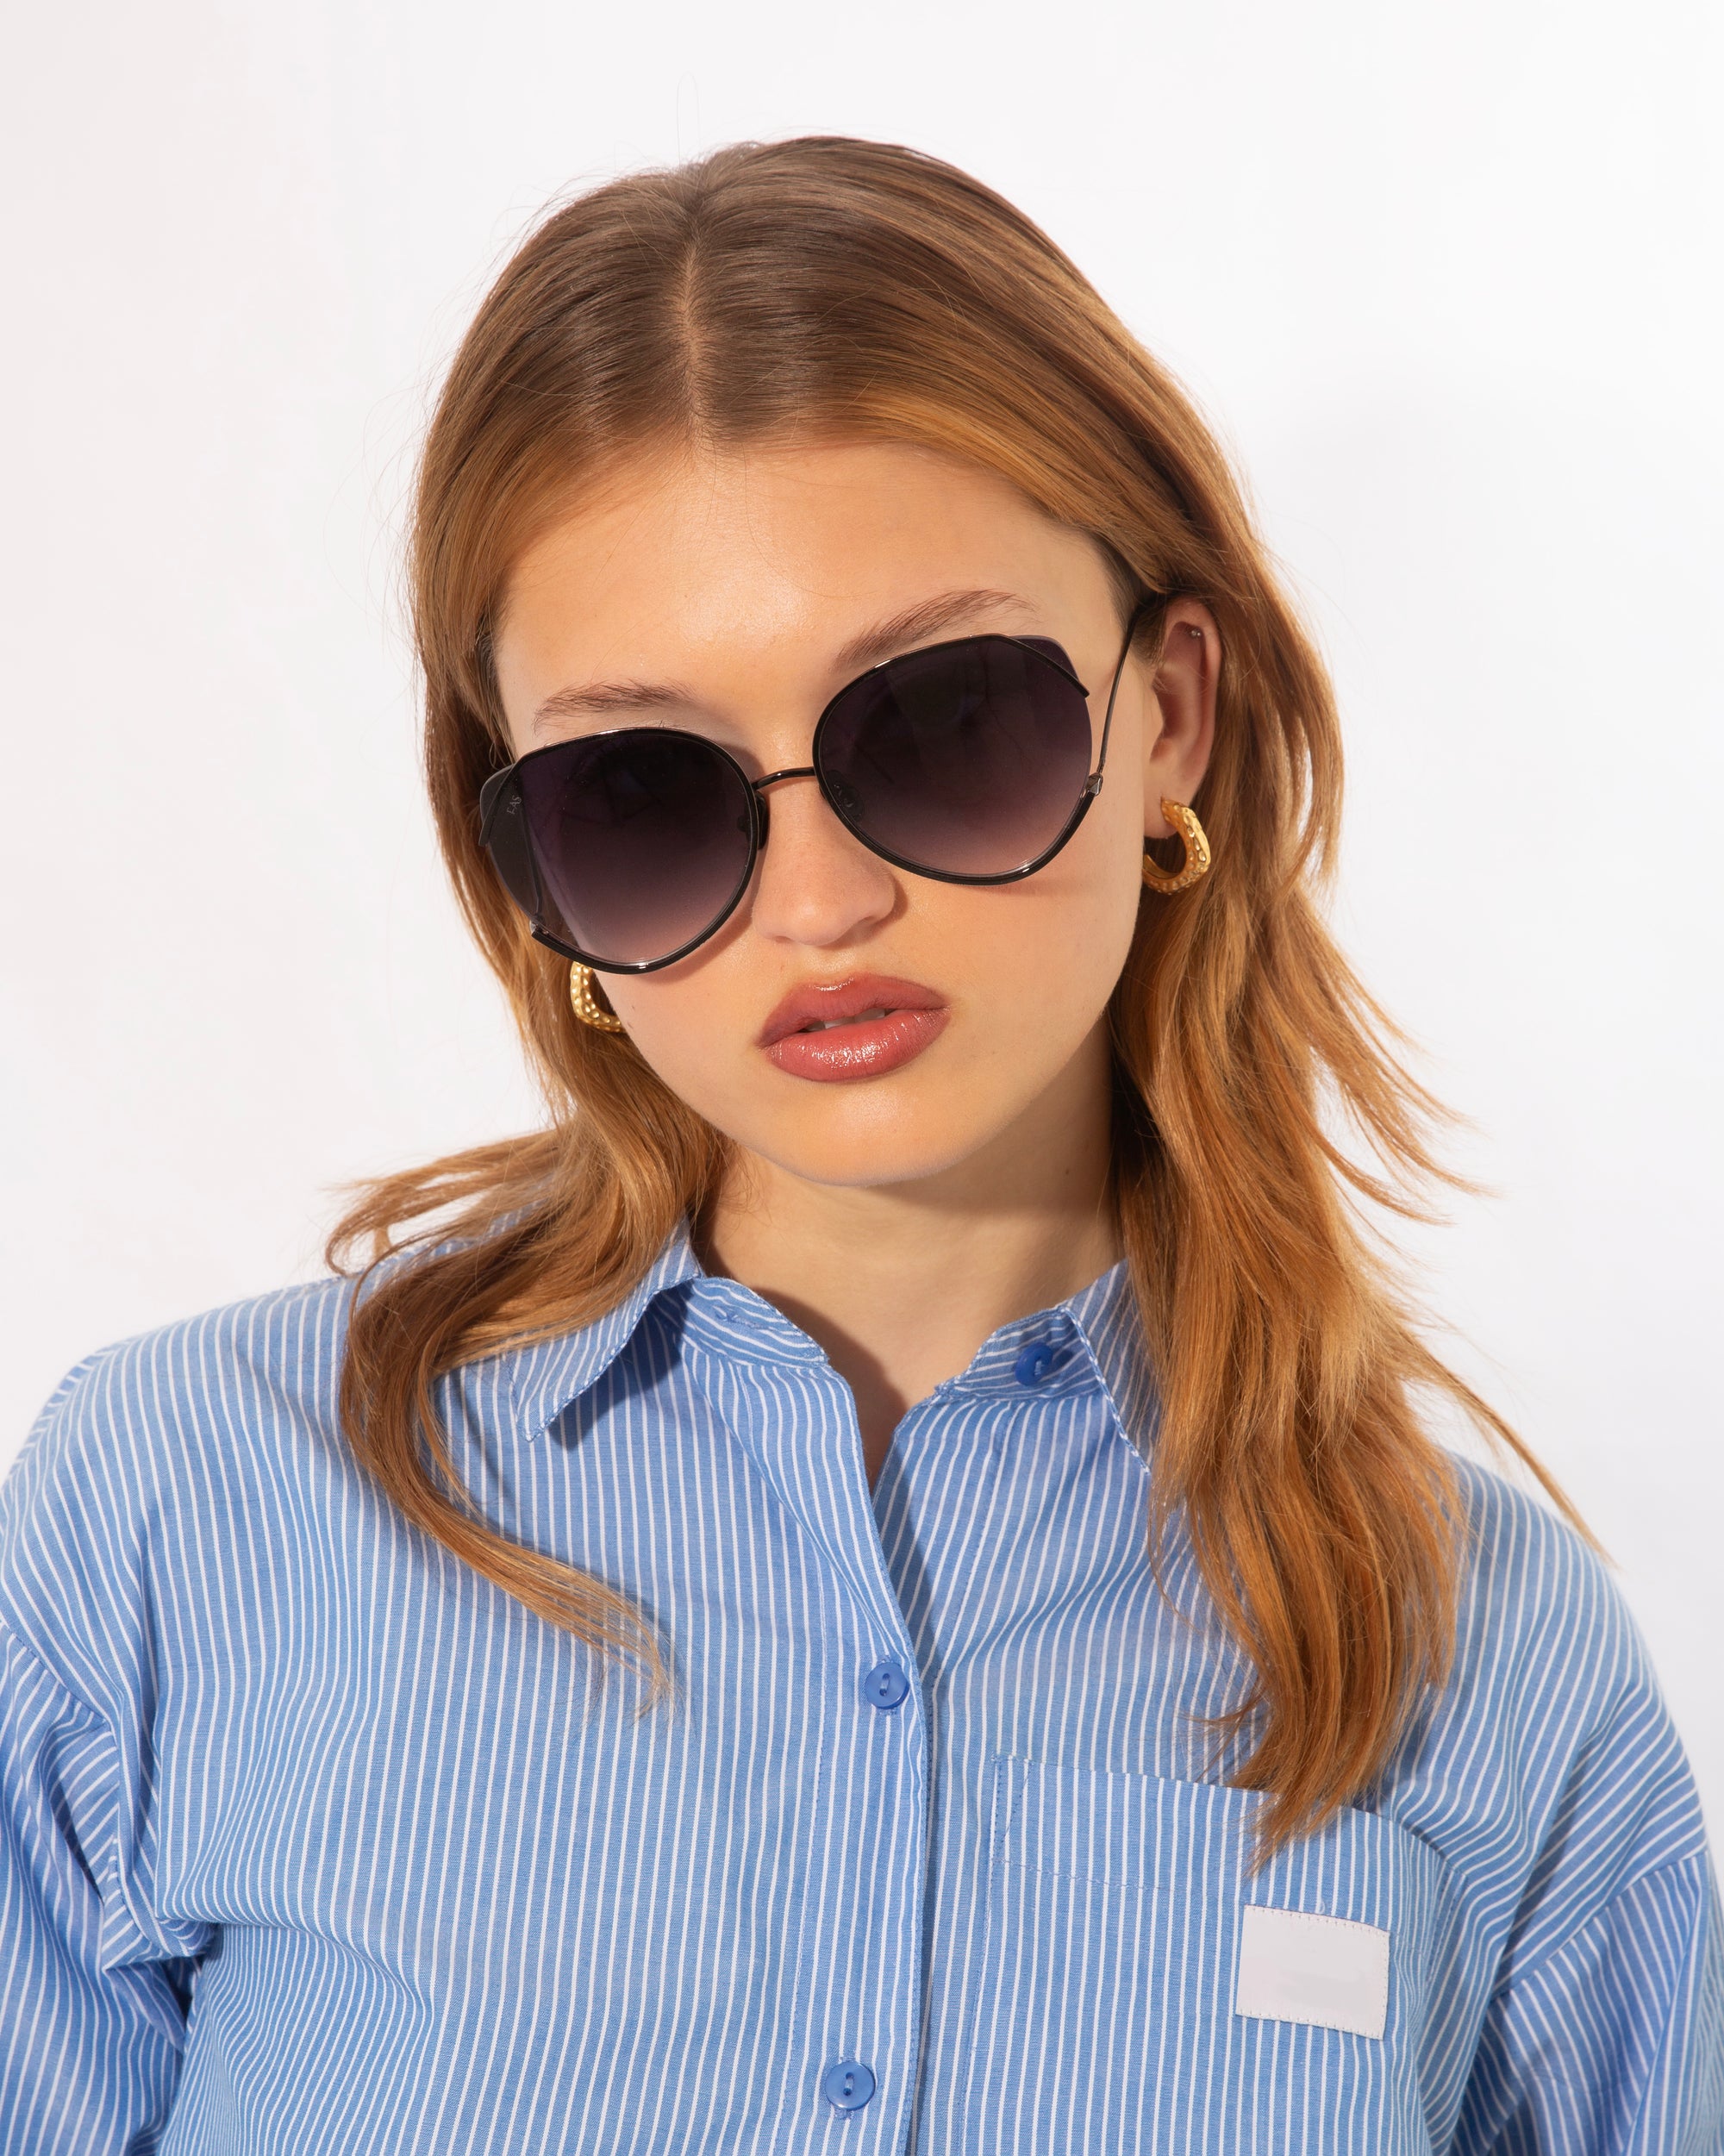 A woman wearing large, round, dark sunglasses with ultralightweight lenses and jadestone nose pads gazes into the camera. She has long, light brown hair and is dressed in a blue and white striped shirt. The background is plain white, highlighting her stylish For Art's Sake® Wonderland accessories offering 100% UV protection.